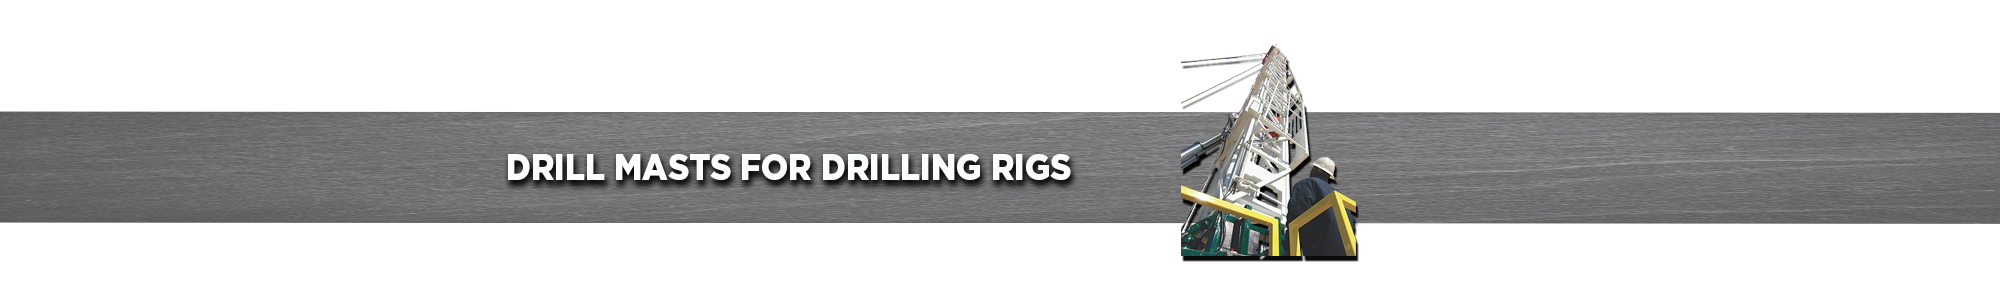 Dragon Drill Masts for Drilling Rigs